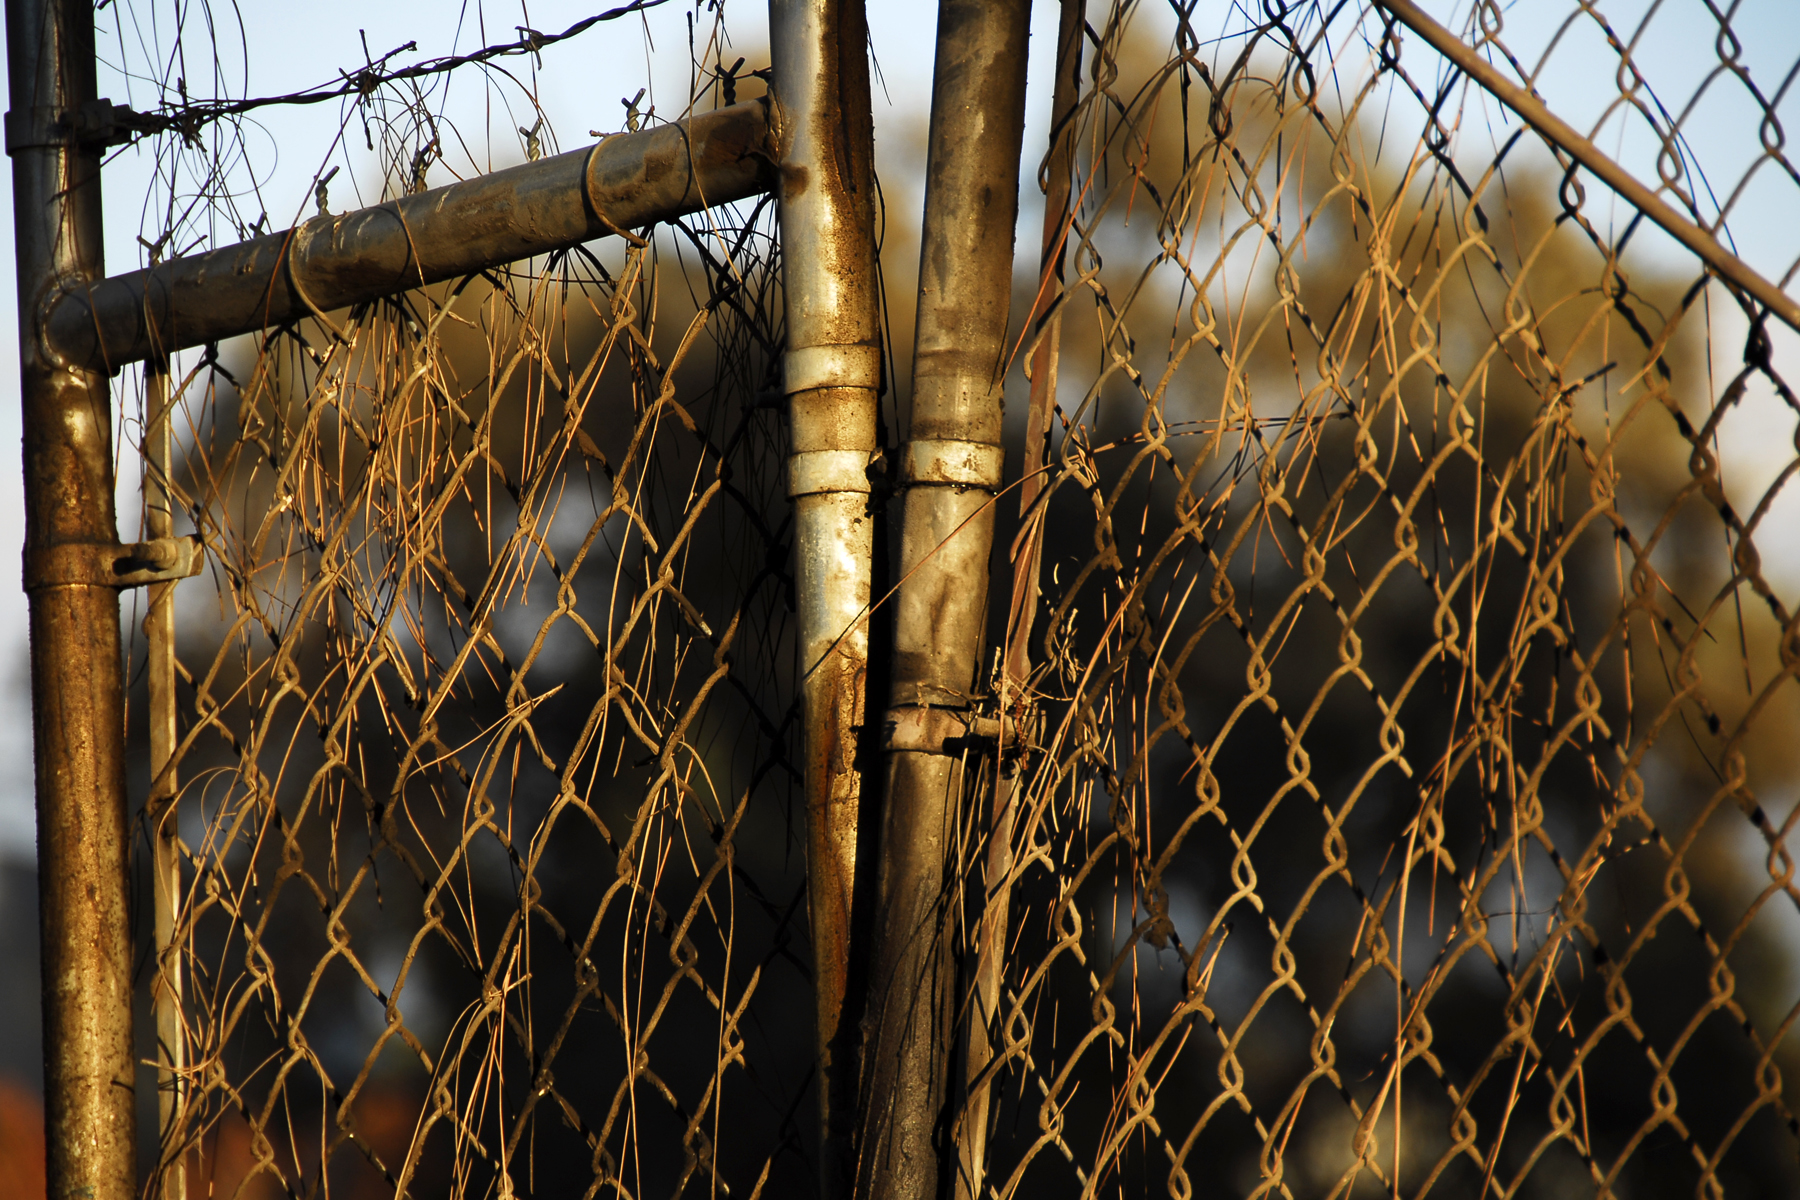 Corroded & rusted chain-link fence photo